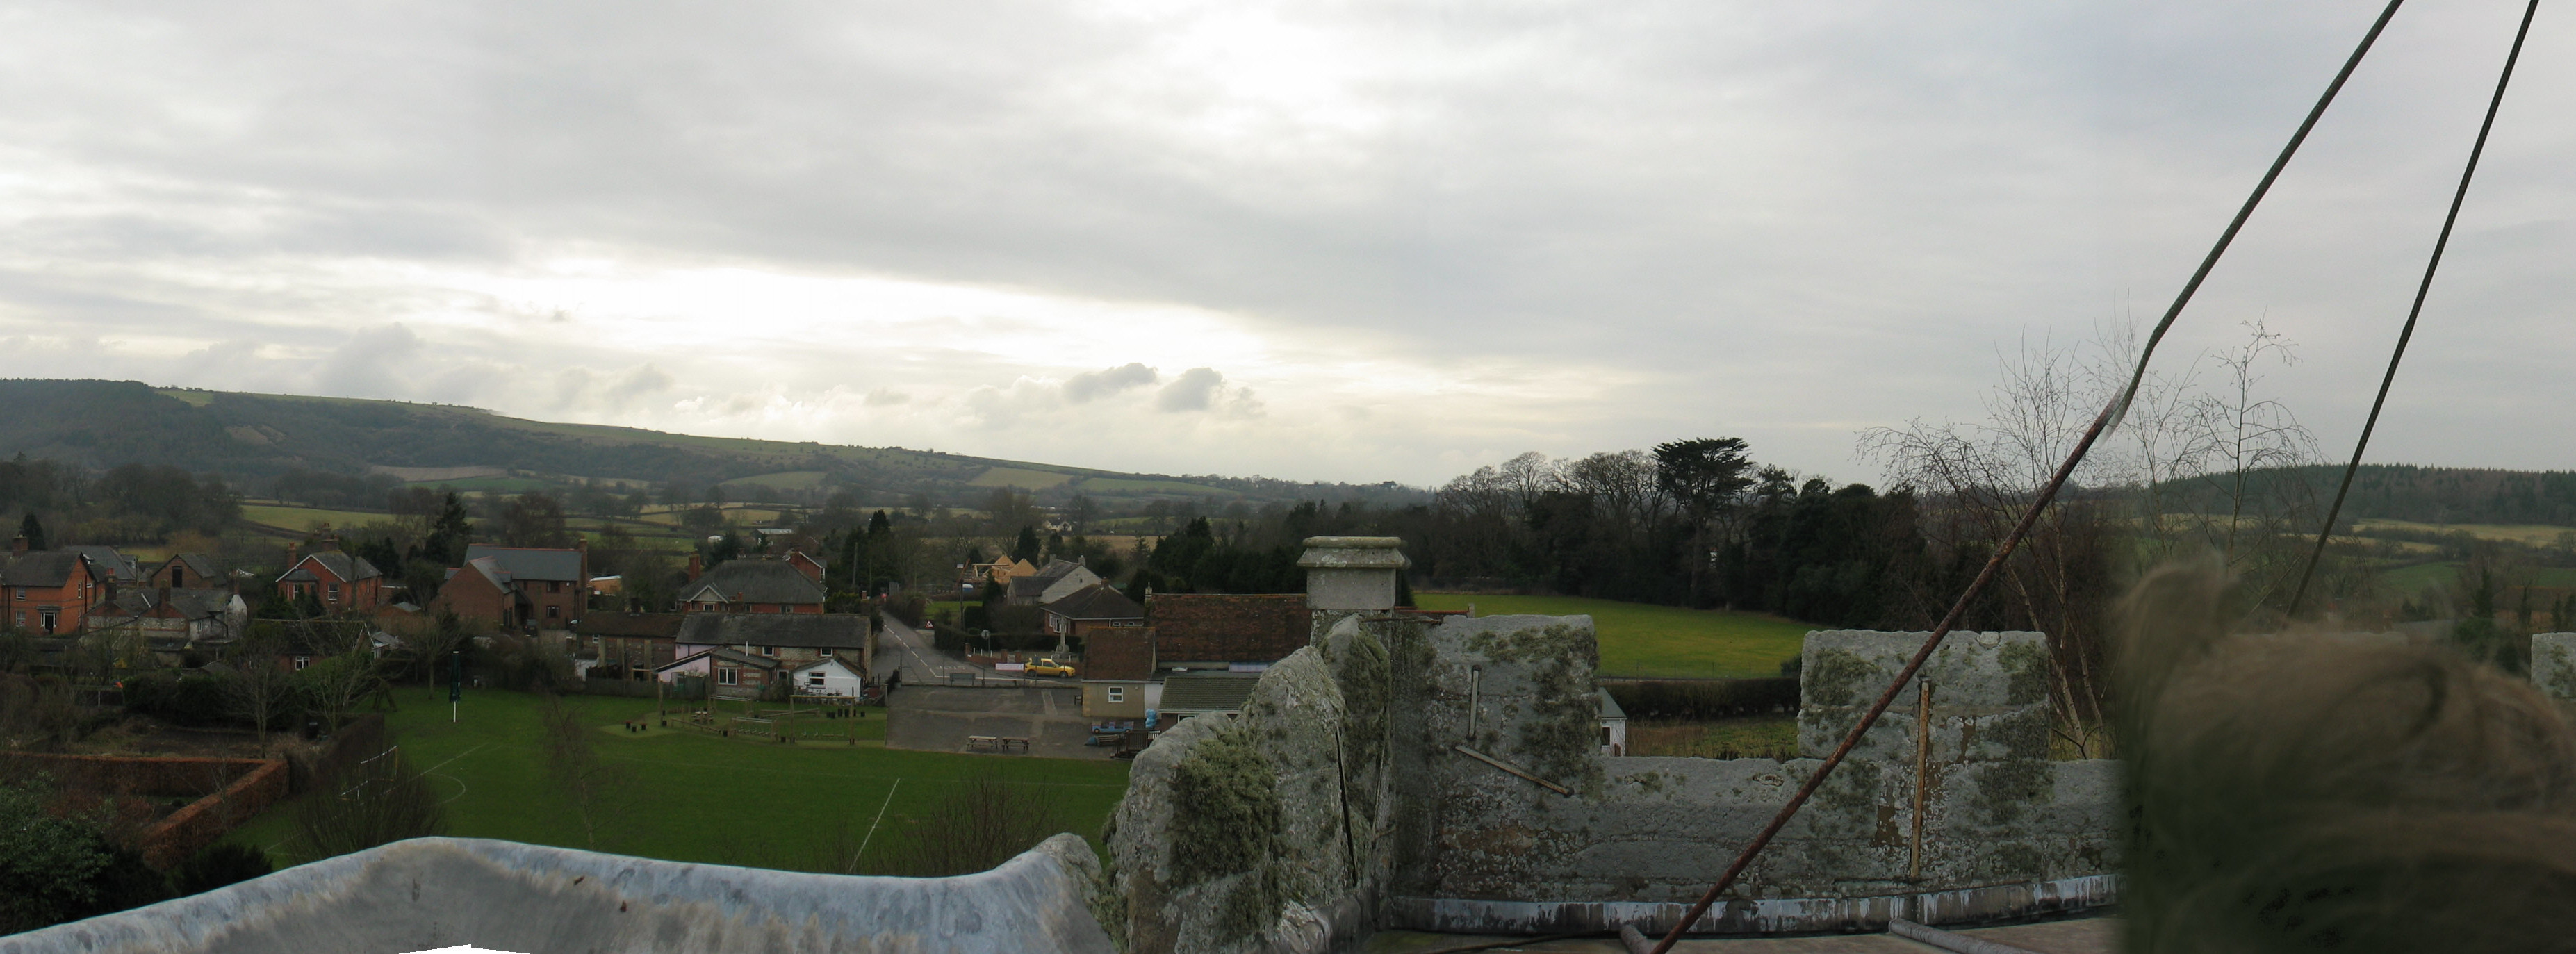 South View from Church Tower